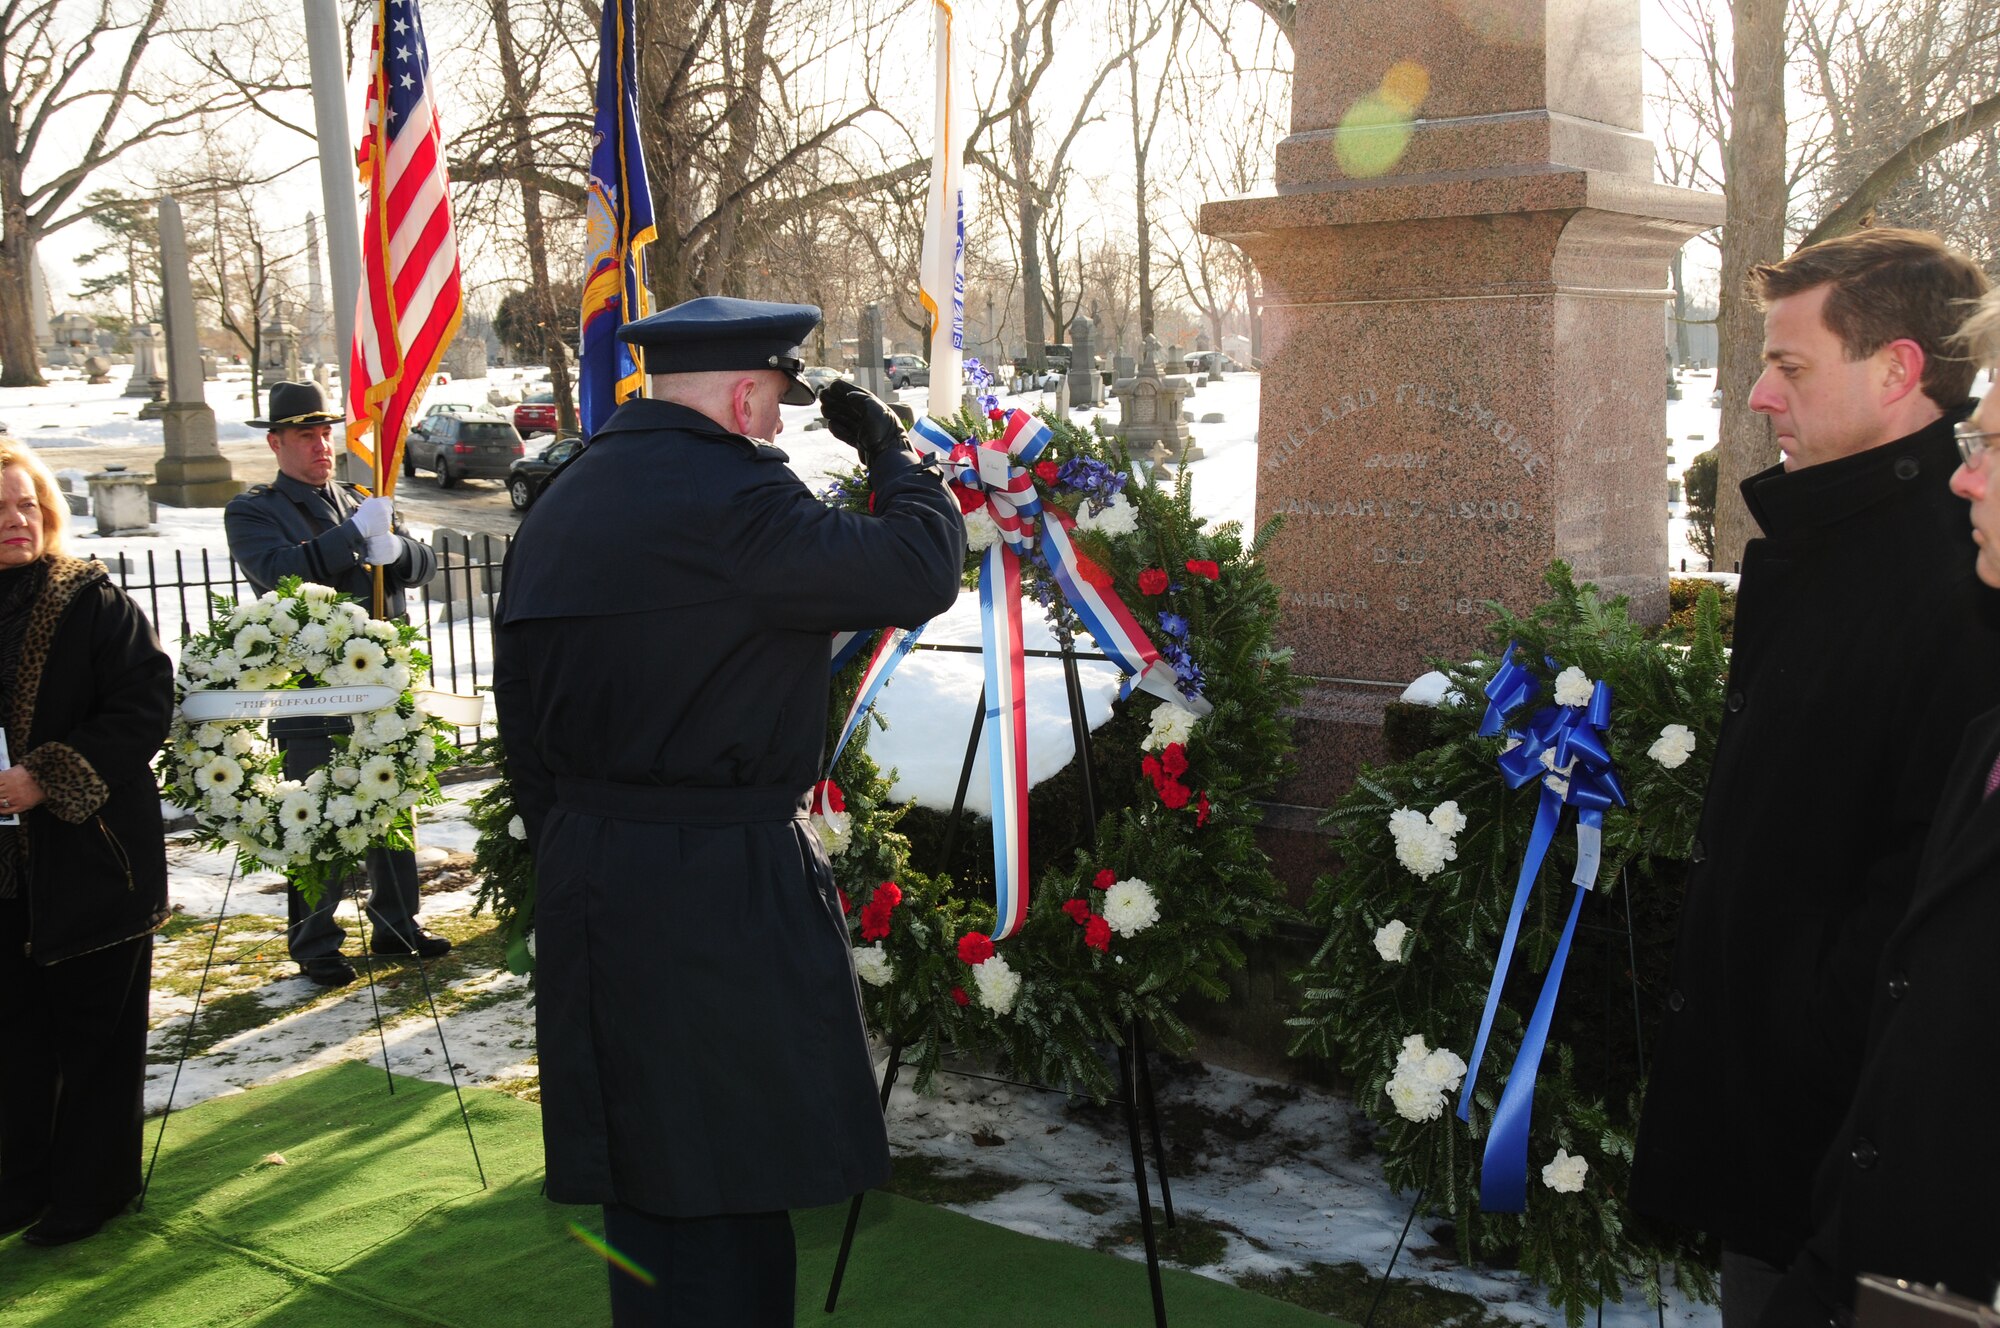 Col. Kevin Rogers, Maintenance Commander of the New York Air National Guard's 107th Airlift Wing, placed the wreath on behalf of President Barack Obama at Forest Lawn Cemetery in Buffalo, NY on Jan. 7, 2013 (Air National Guard Photo/Senior Master Sgt Ray Lloyd)